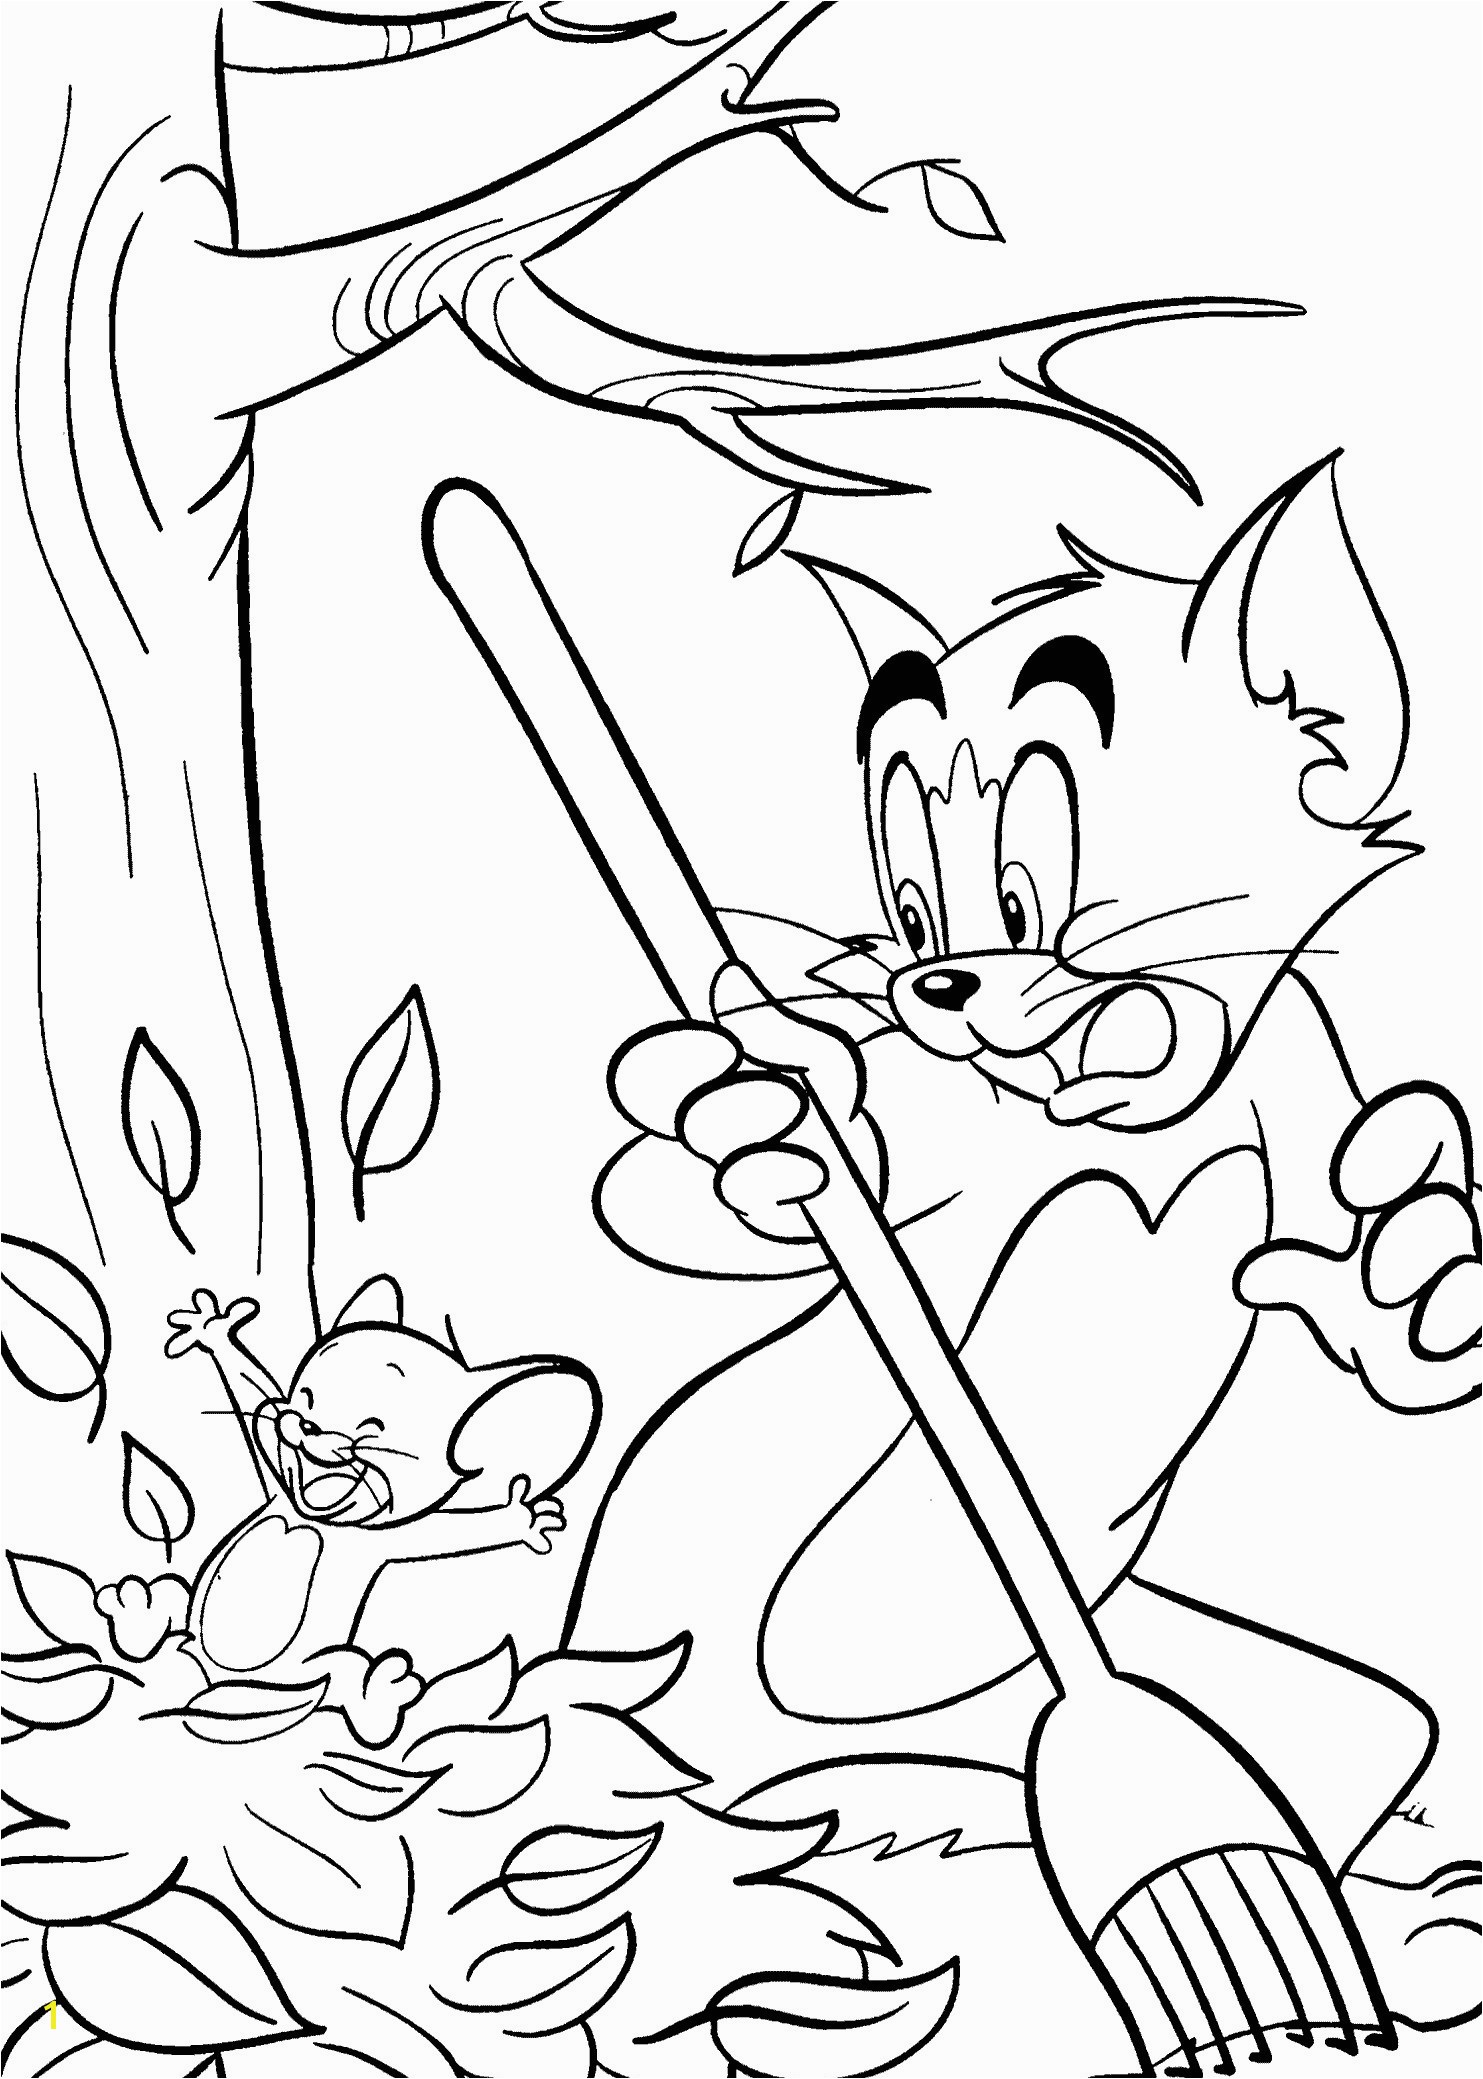 Www.coloring-pages-kids.com 15 Fresh Www Coloring Pages for Kids Image